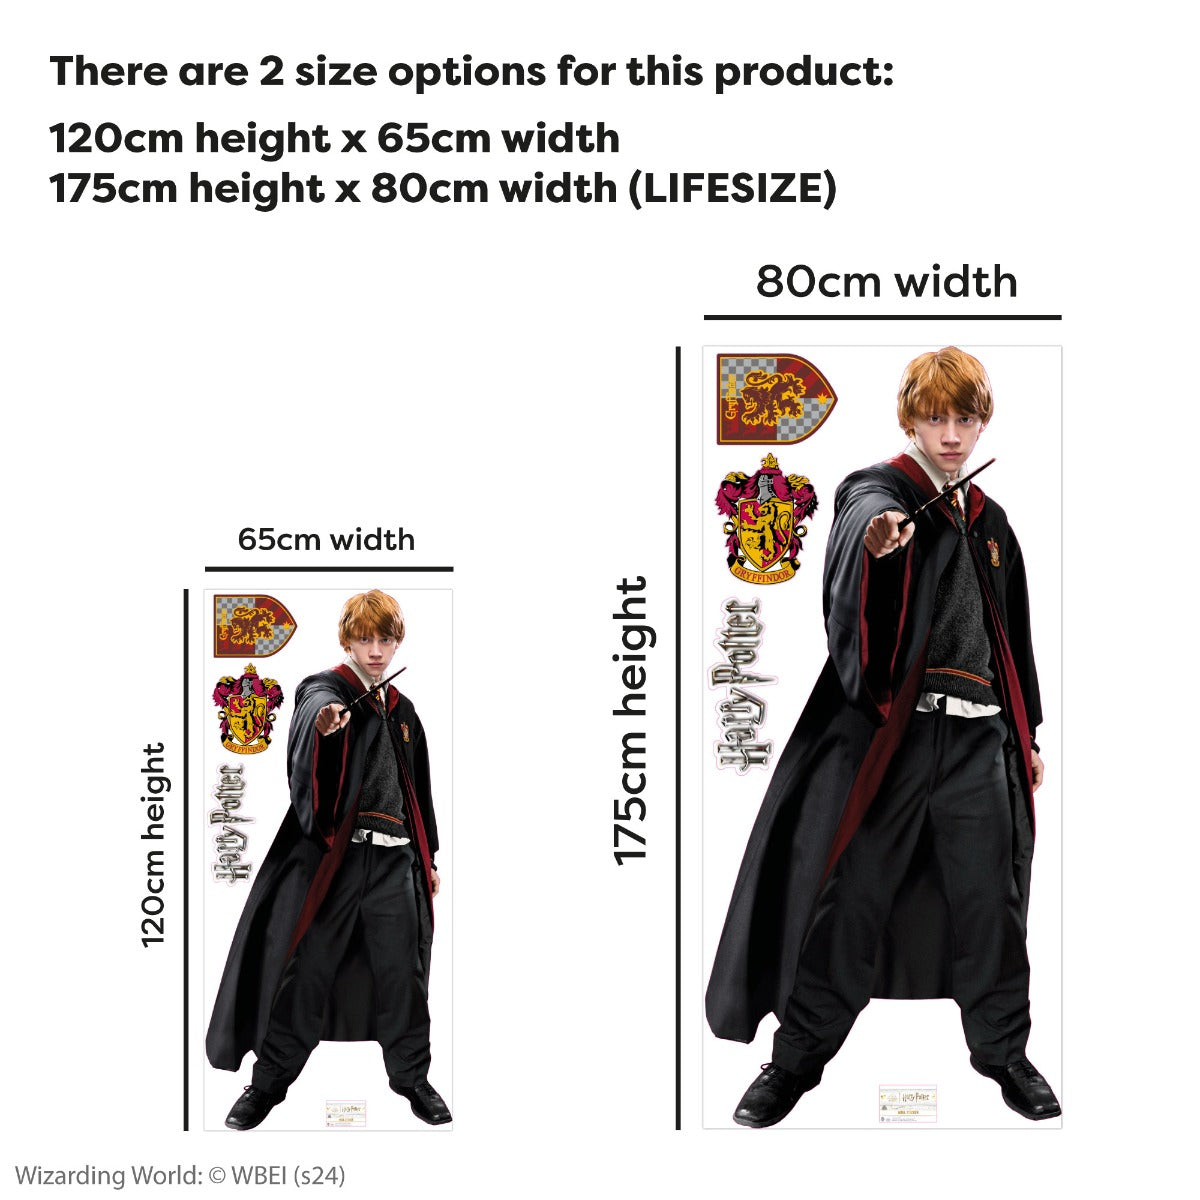 HARRY POTTER Wall Sticker - Ron Weasley 5th Year Cut Out Wall Decal Wizarding World Art